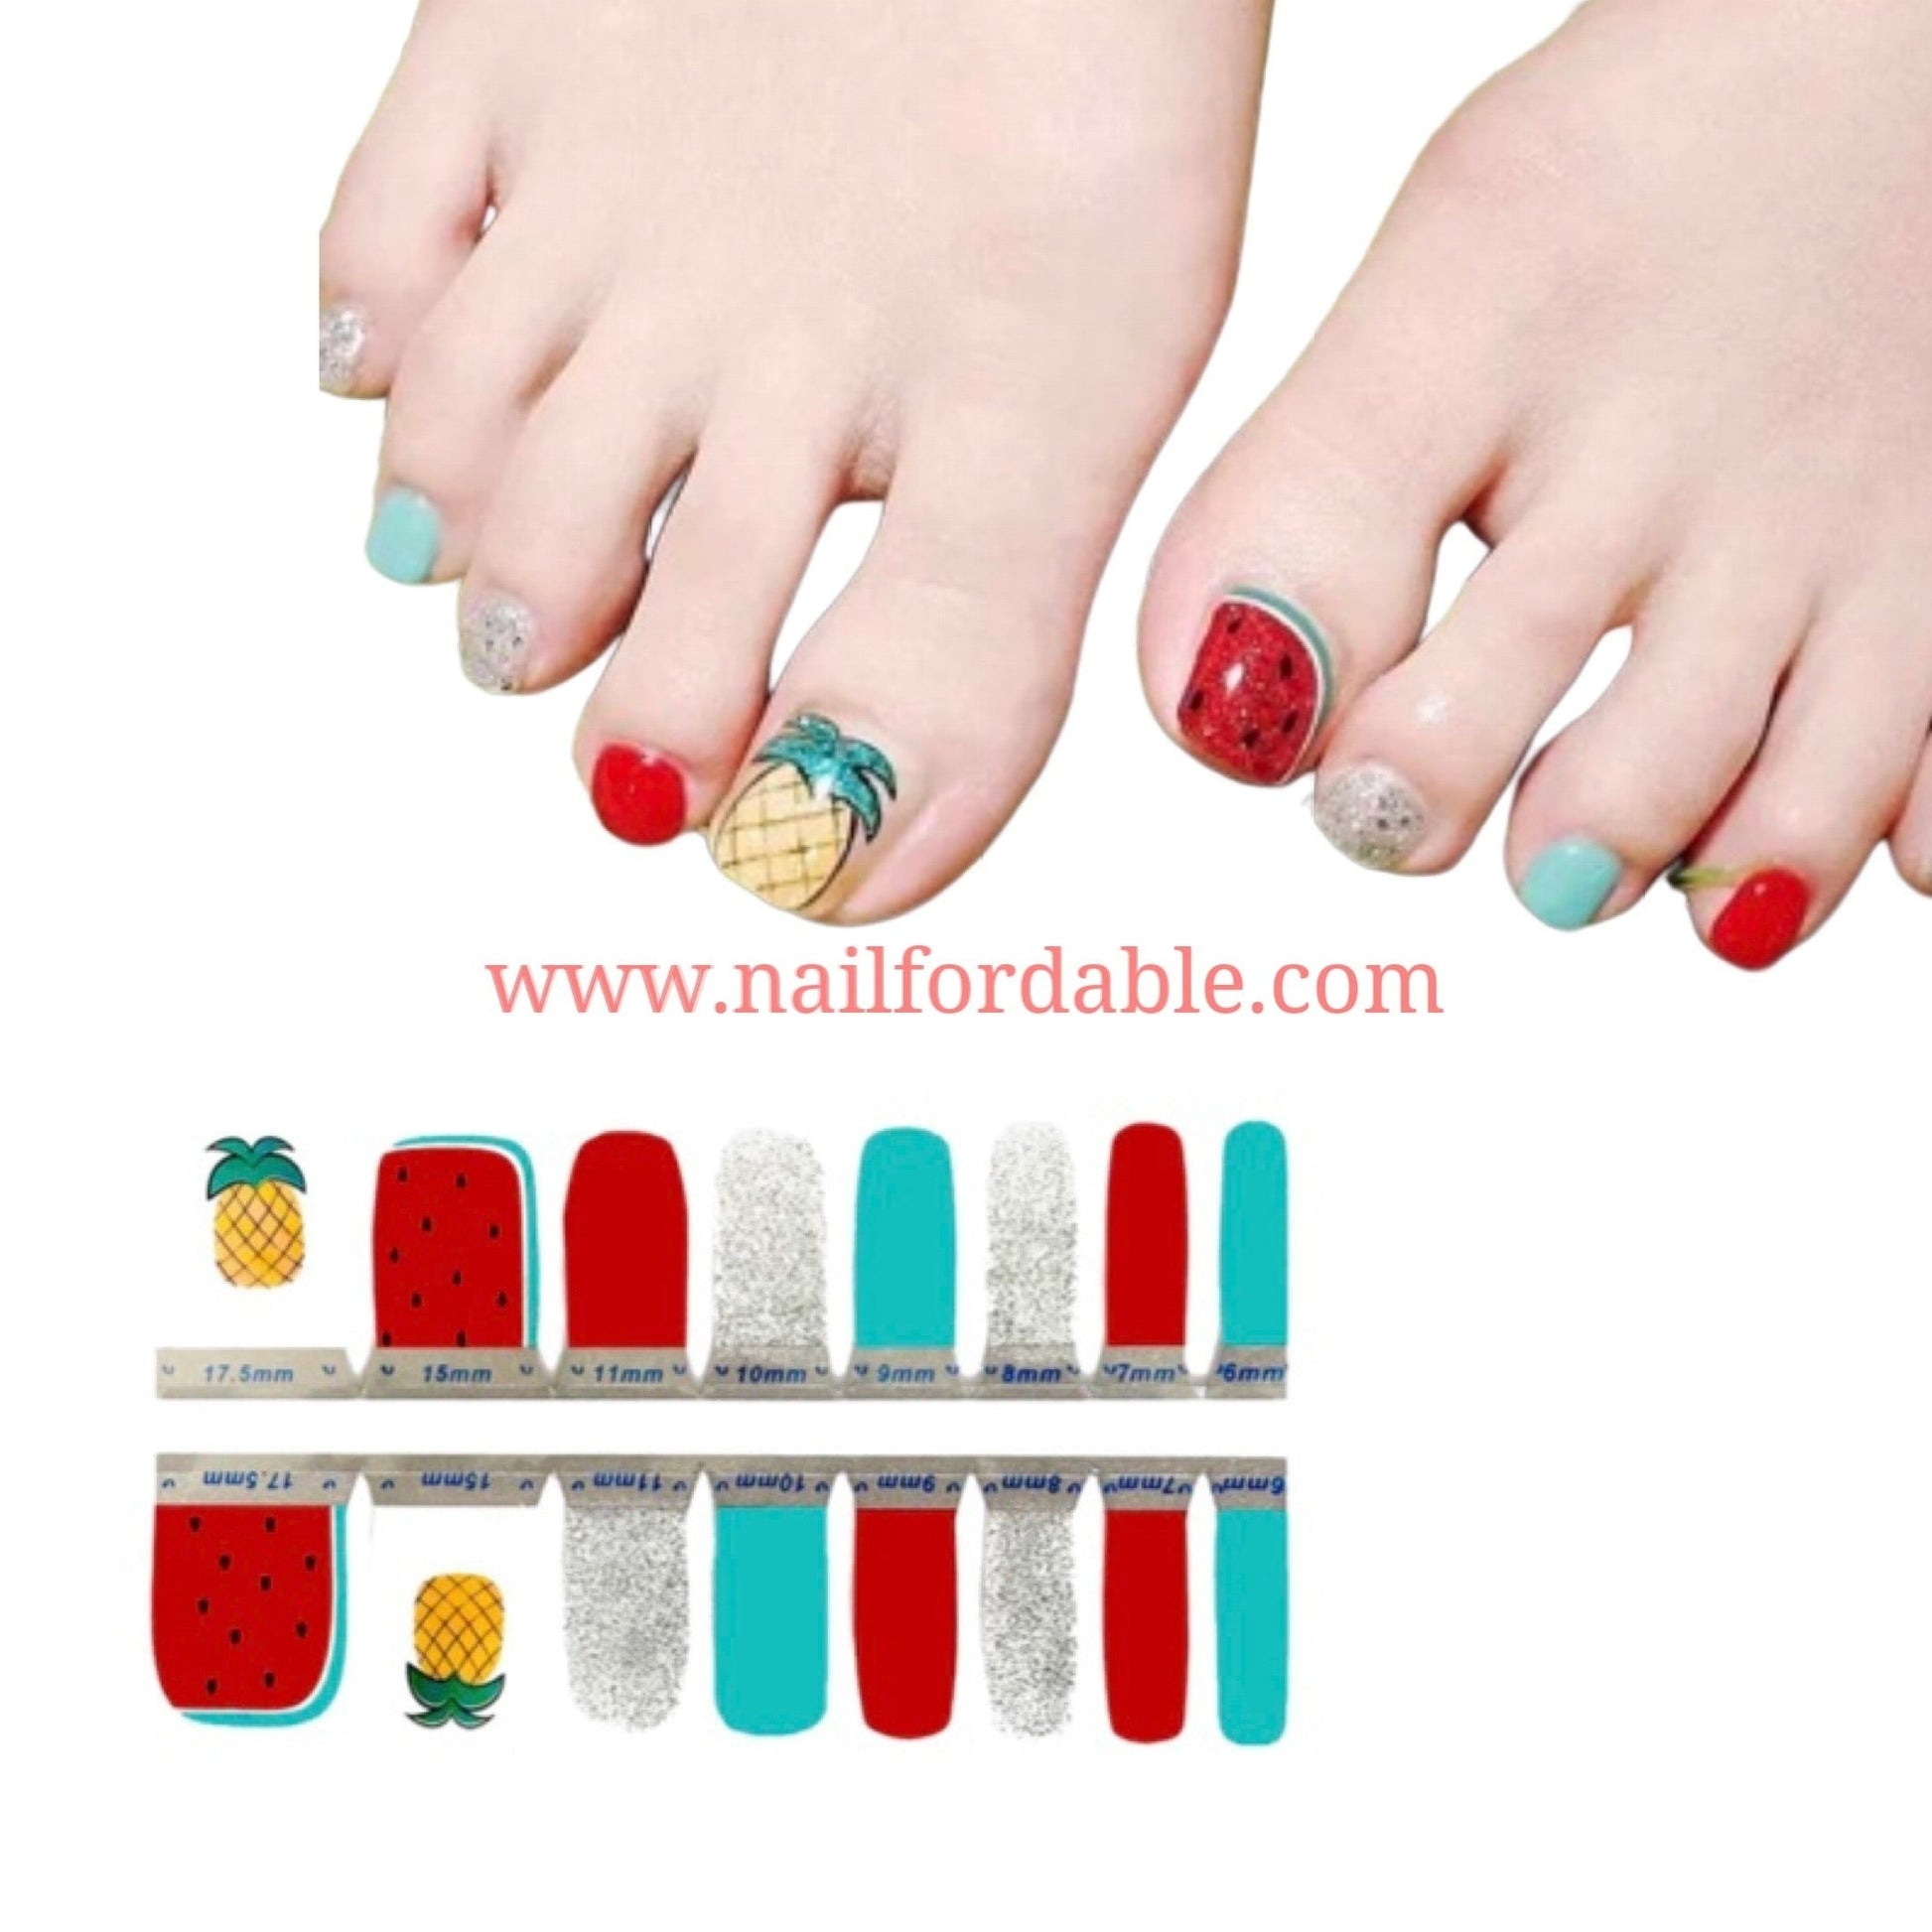 Pinneaples and Watermelons Nail Wraps | Semi Cured Gel Wraps | Gel Nail Wraps |Nail Polish | Nail Stickers